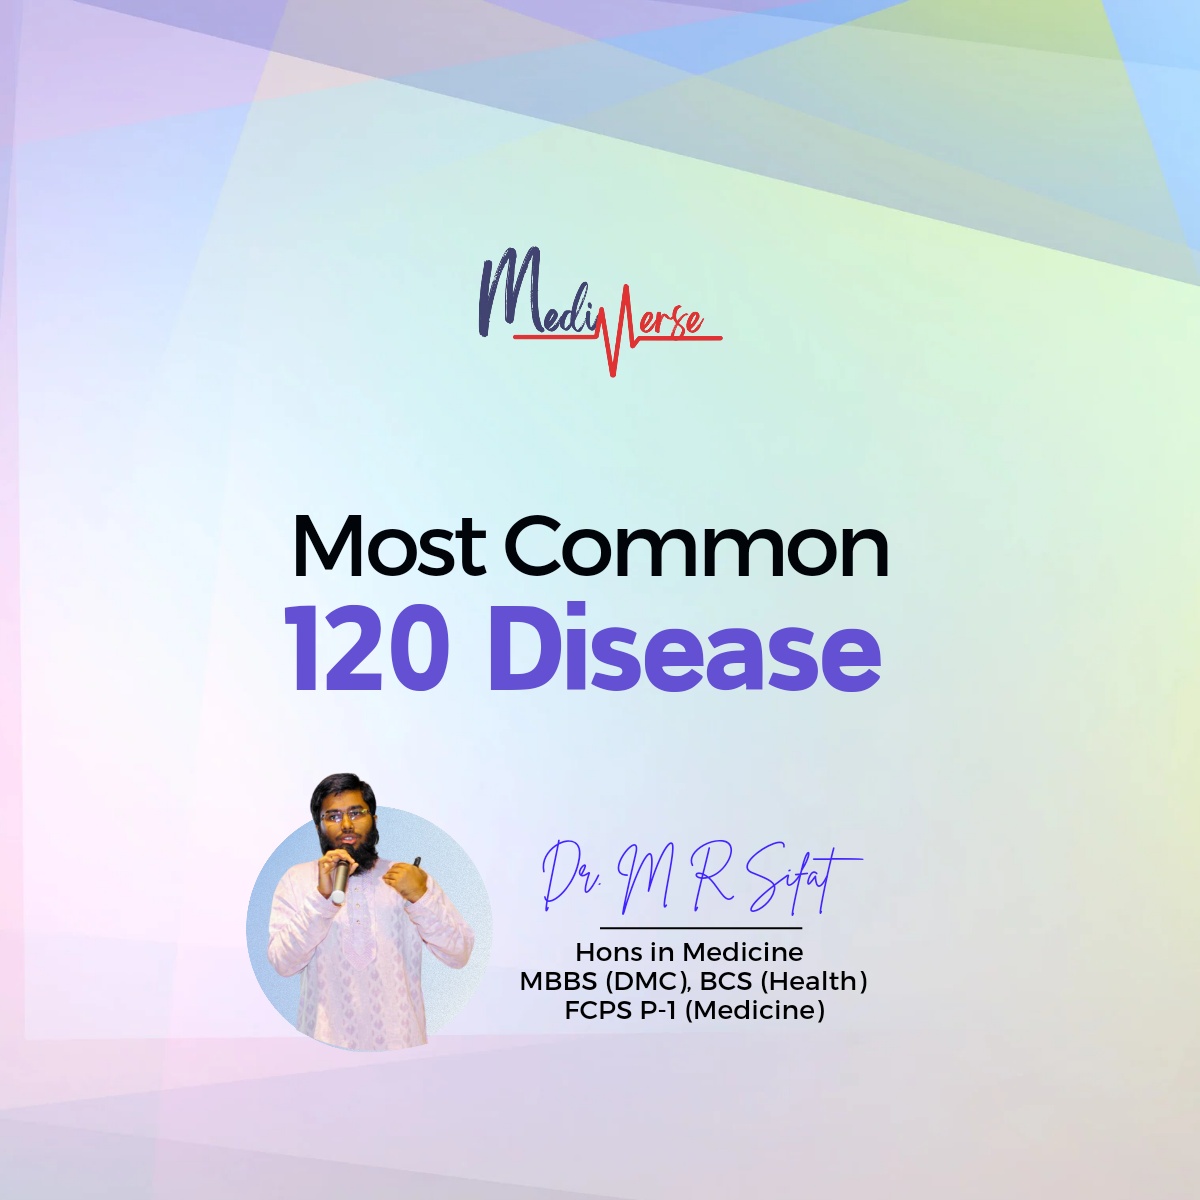 Most Common 120 Diseases (2019-20)